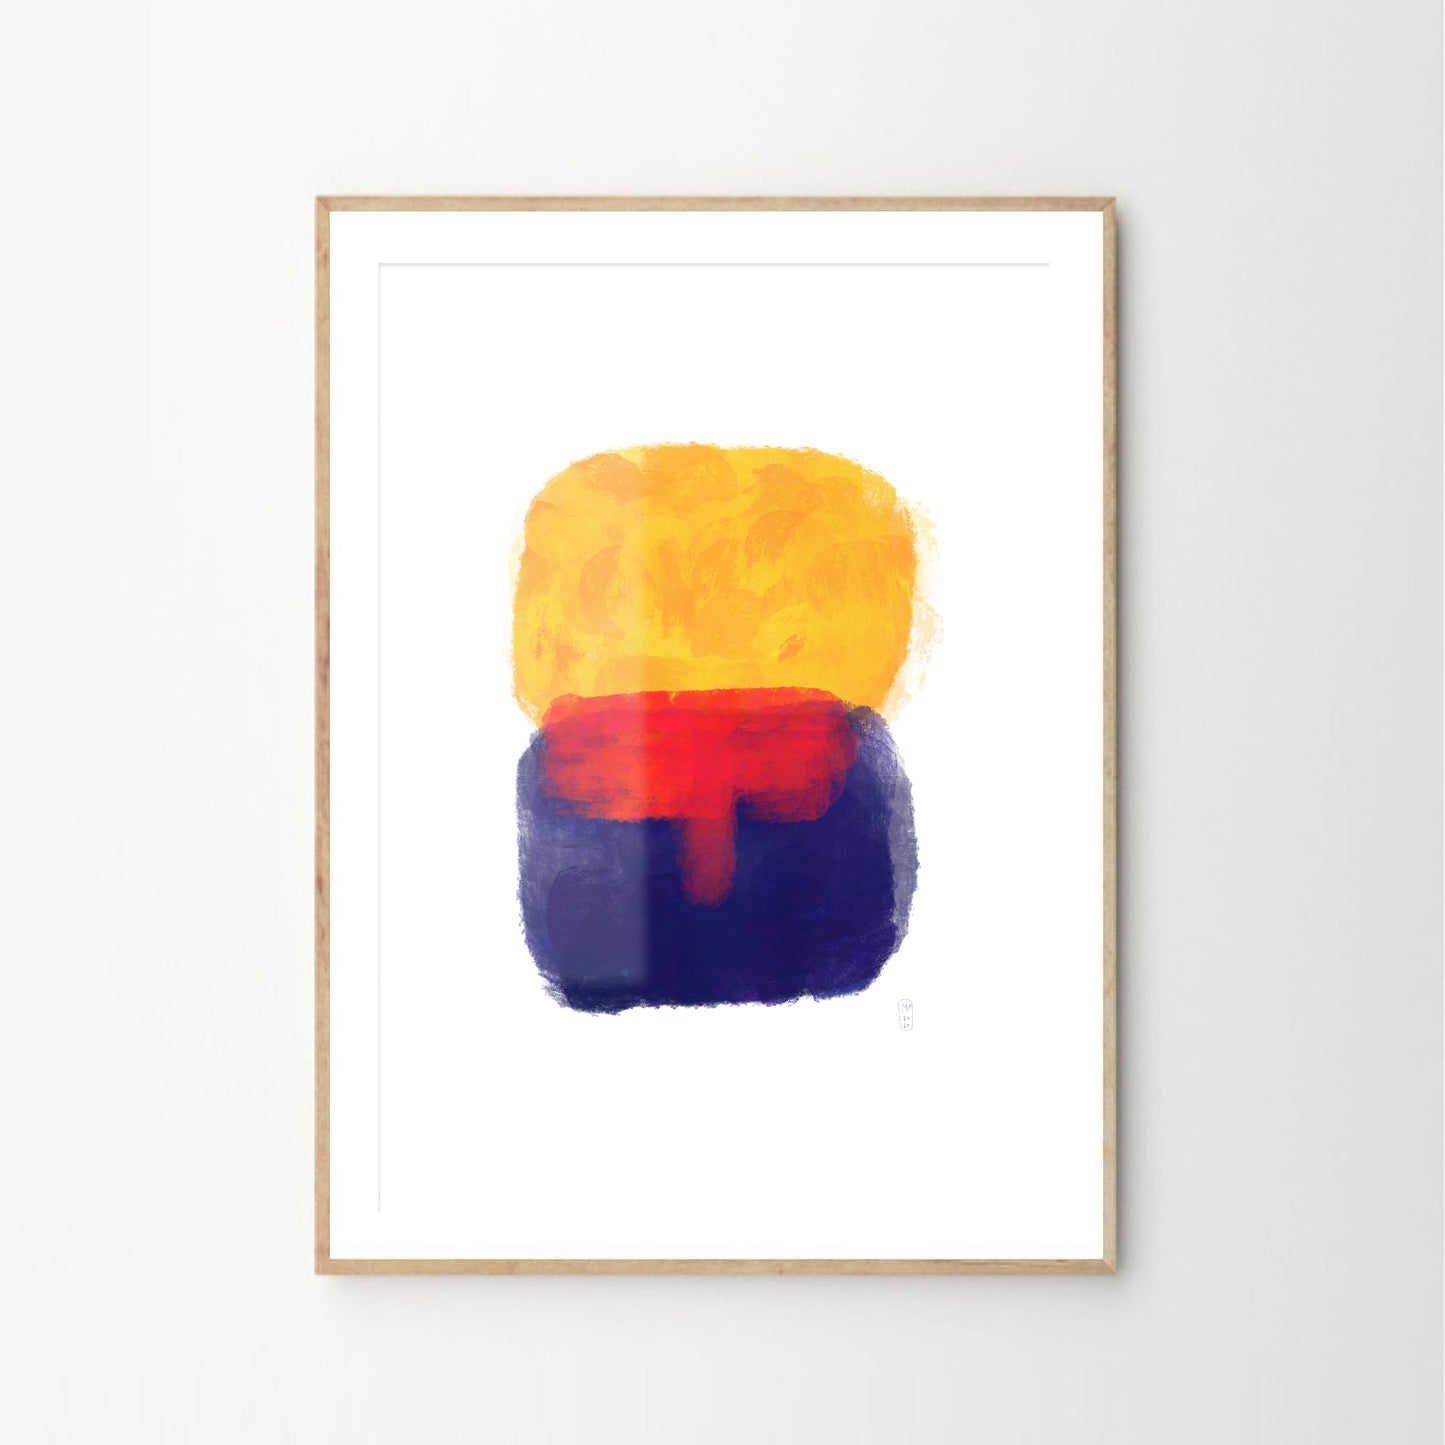 Minimalist art prints made with yellow and blue shapes painted in oil, framed, Giclée print, framed, Hahnemühle Photo Rag paper stock, archival quality for 100+ years